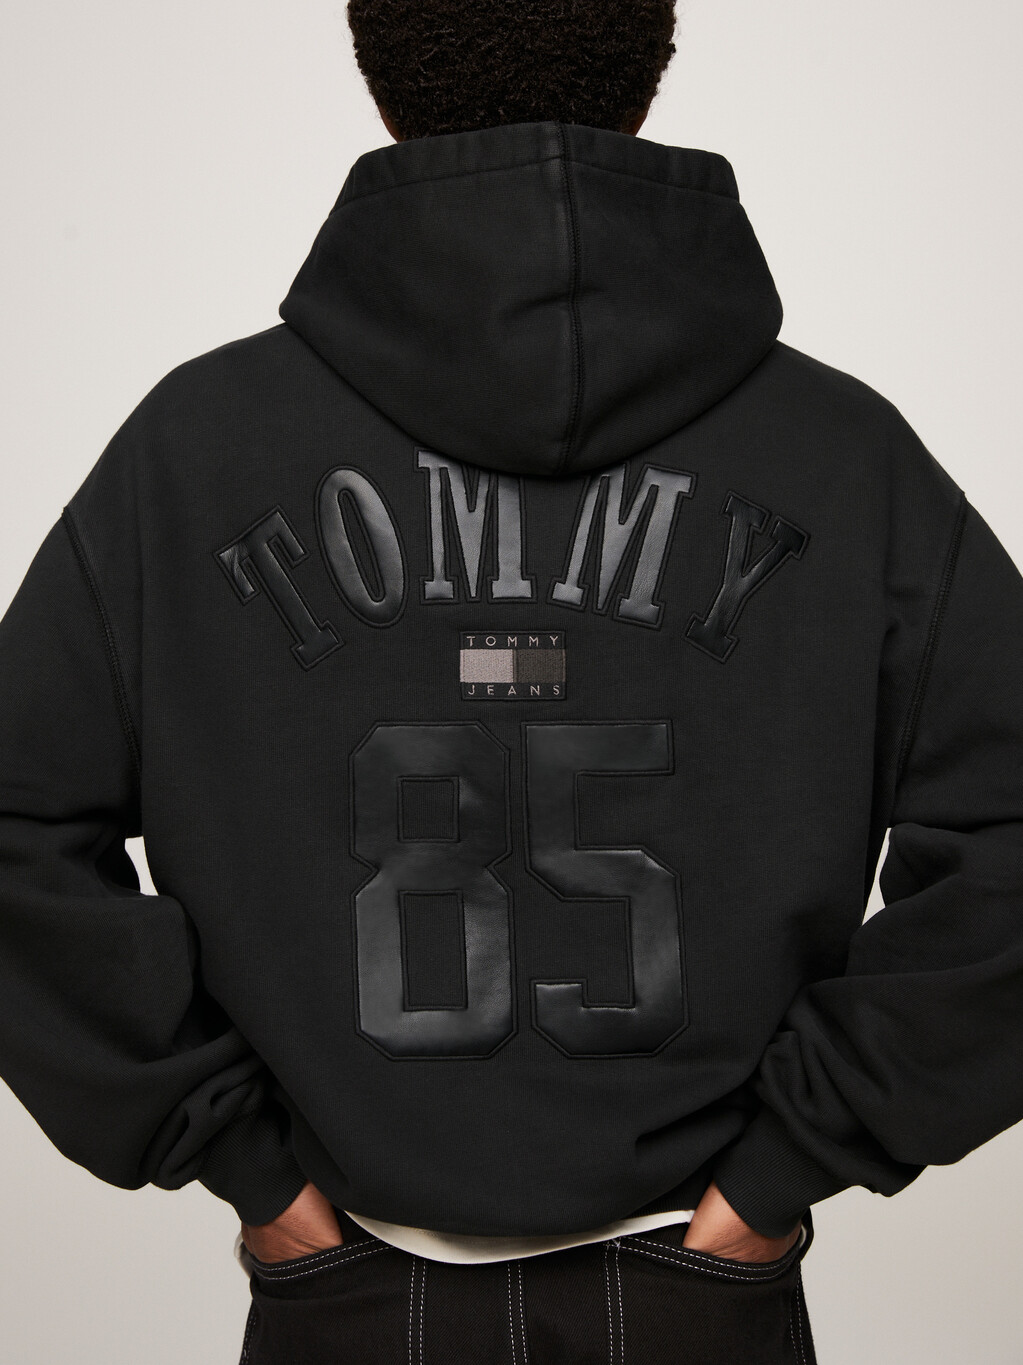 Tommy Remastered Dual Gender 1985 Collection Hoody, Black, hi-res